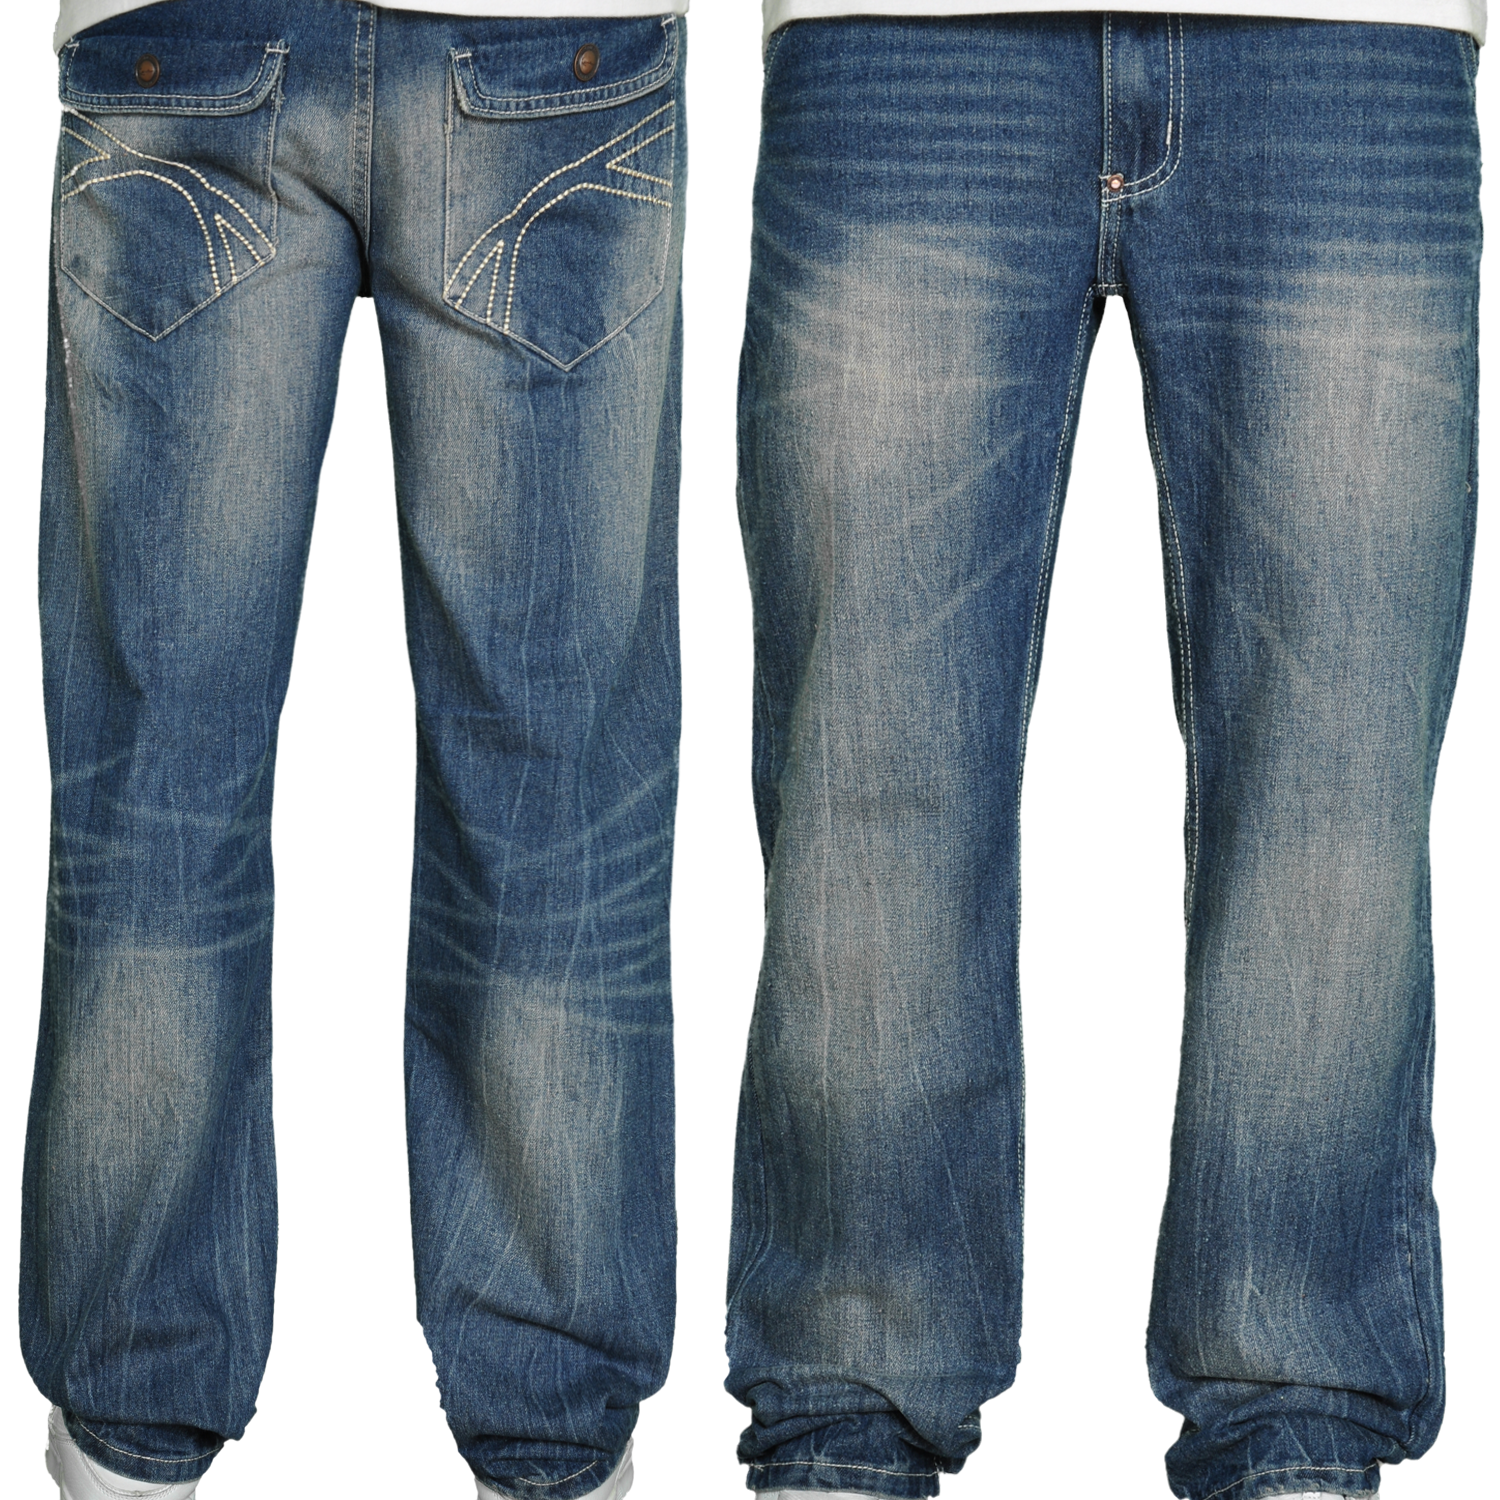 Foto Karl Kani Originals Selected Flavour Contemporary Comfort Fit Jeans...